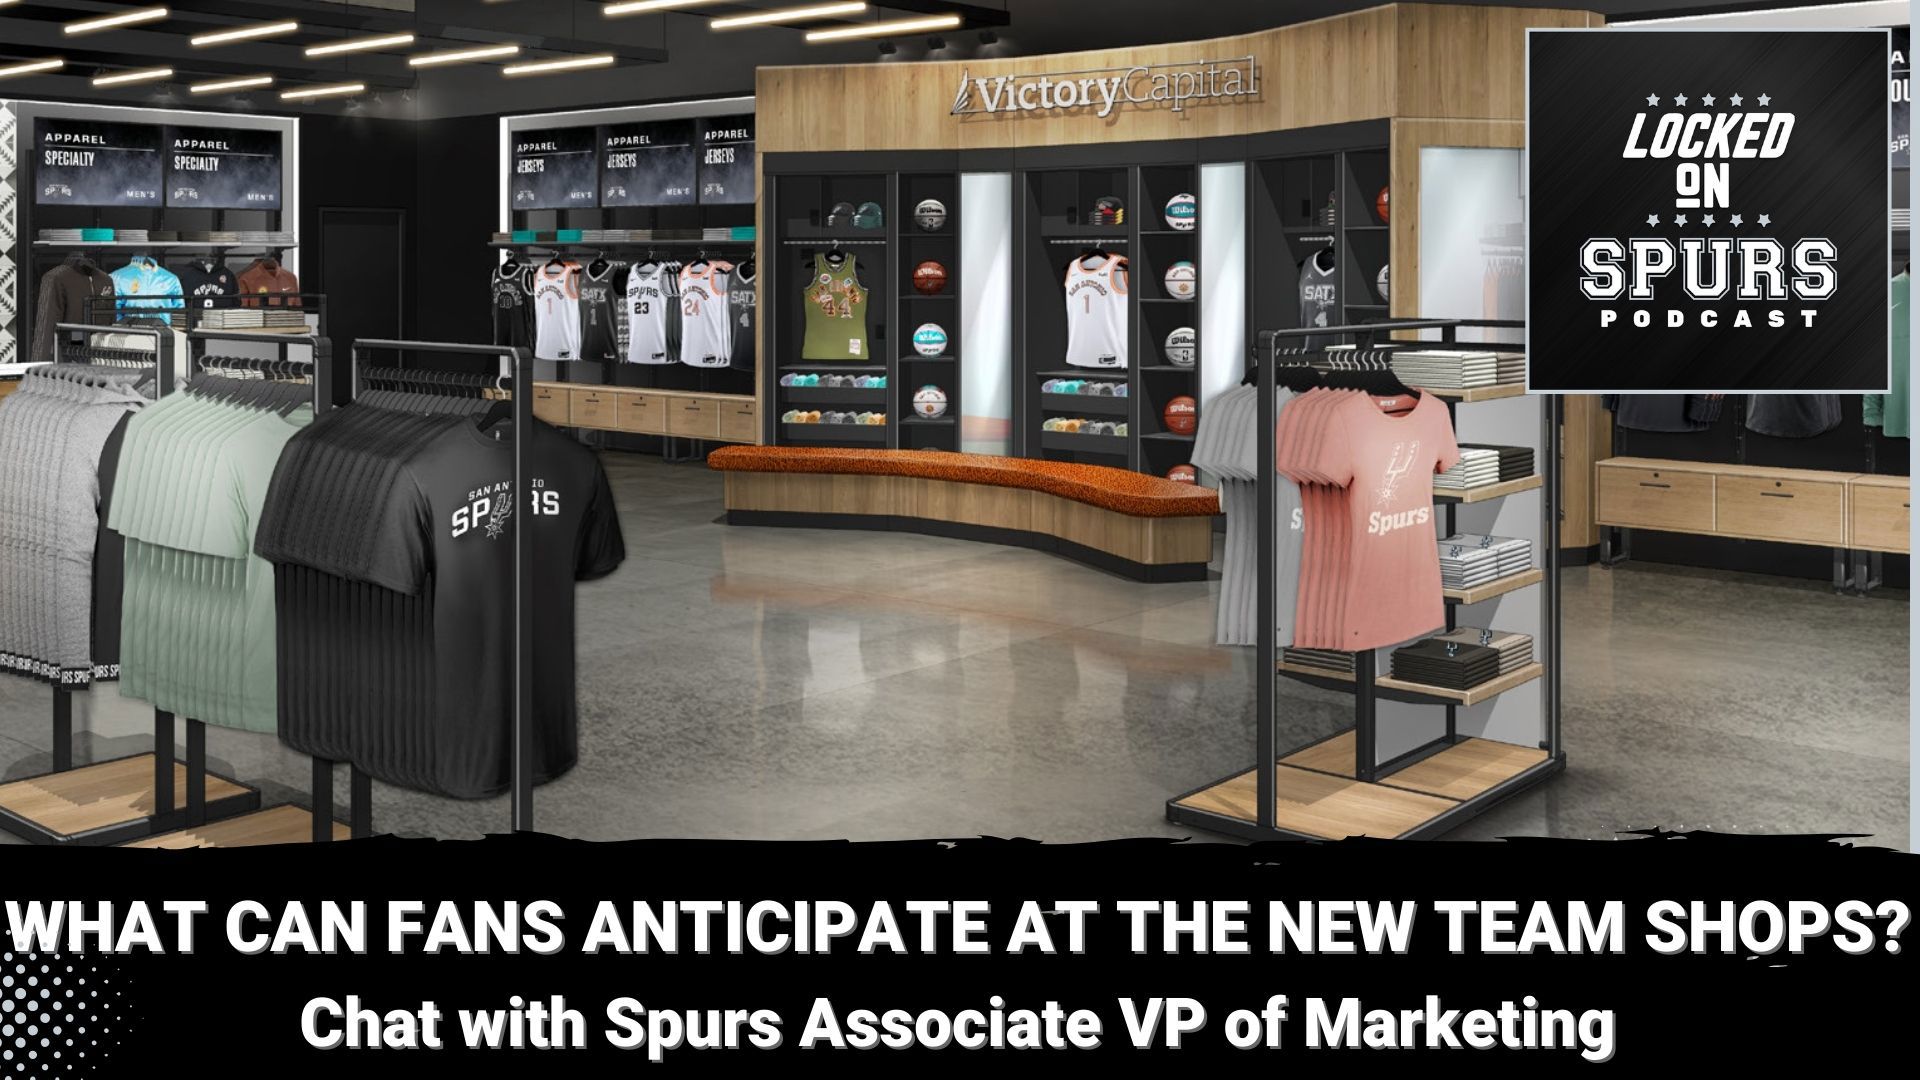 There will be plenty for Spurs fans at the team fan shops this upcoming season.